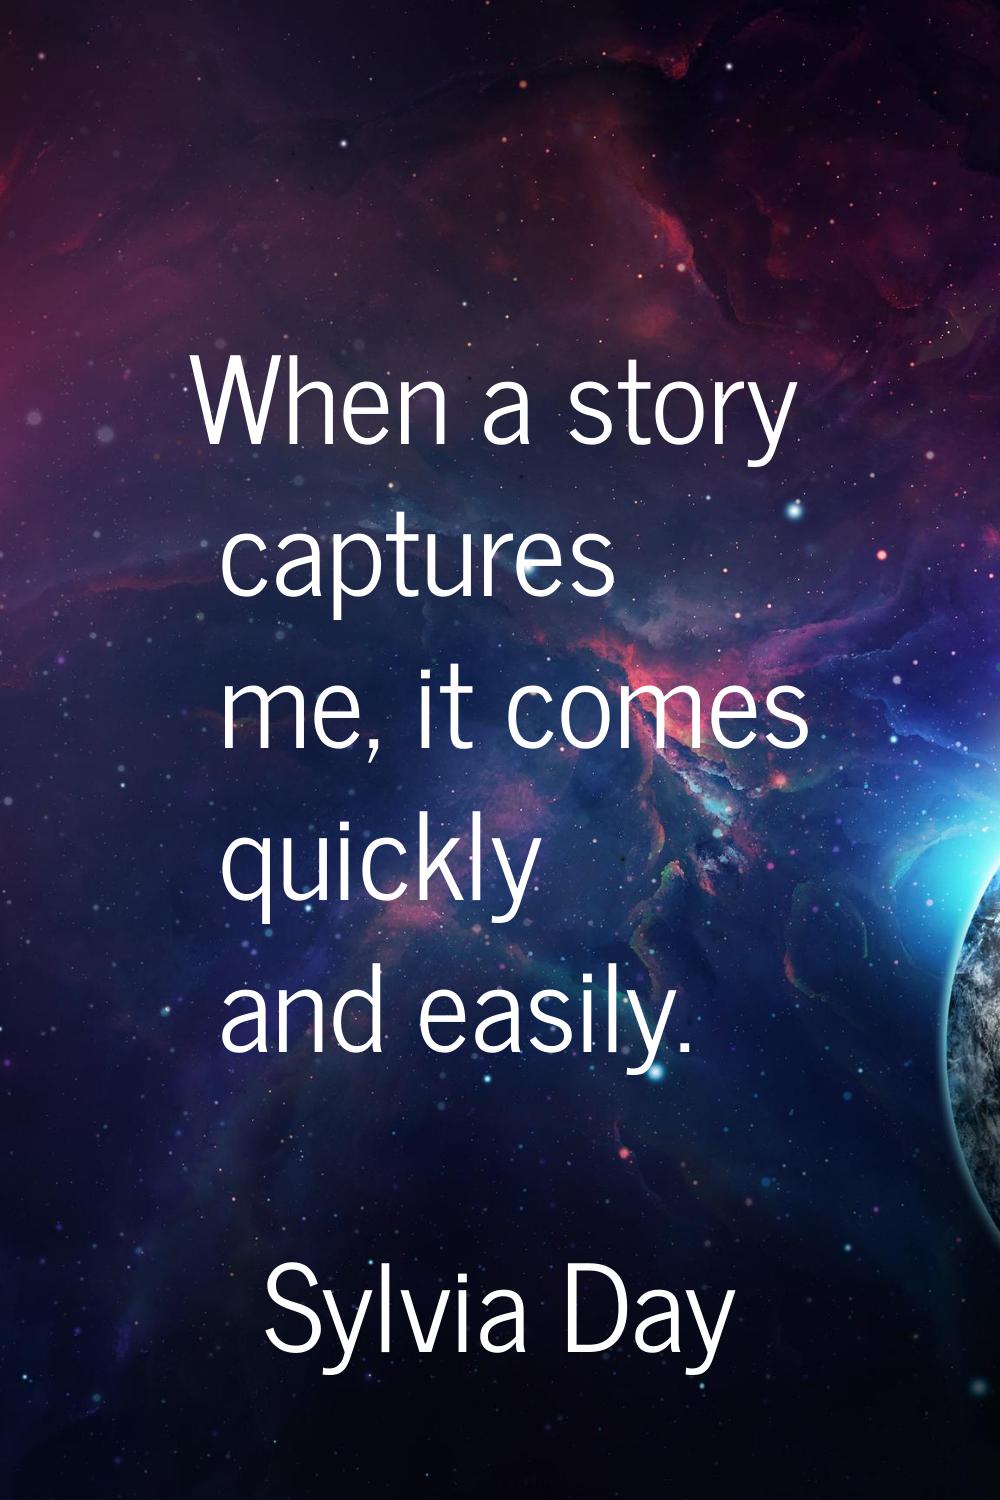 When a story captures me, it comes quickly and easily.